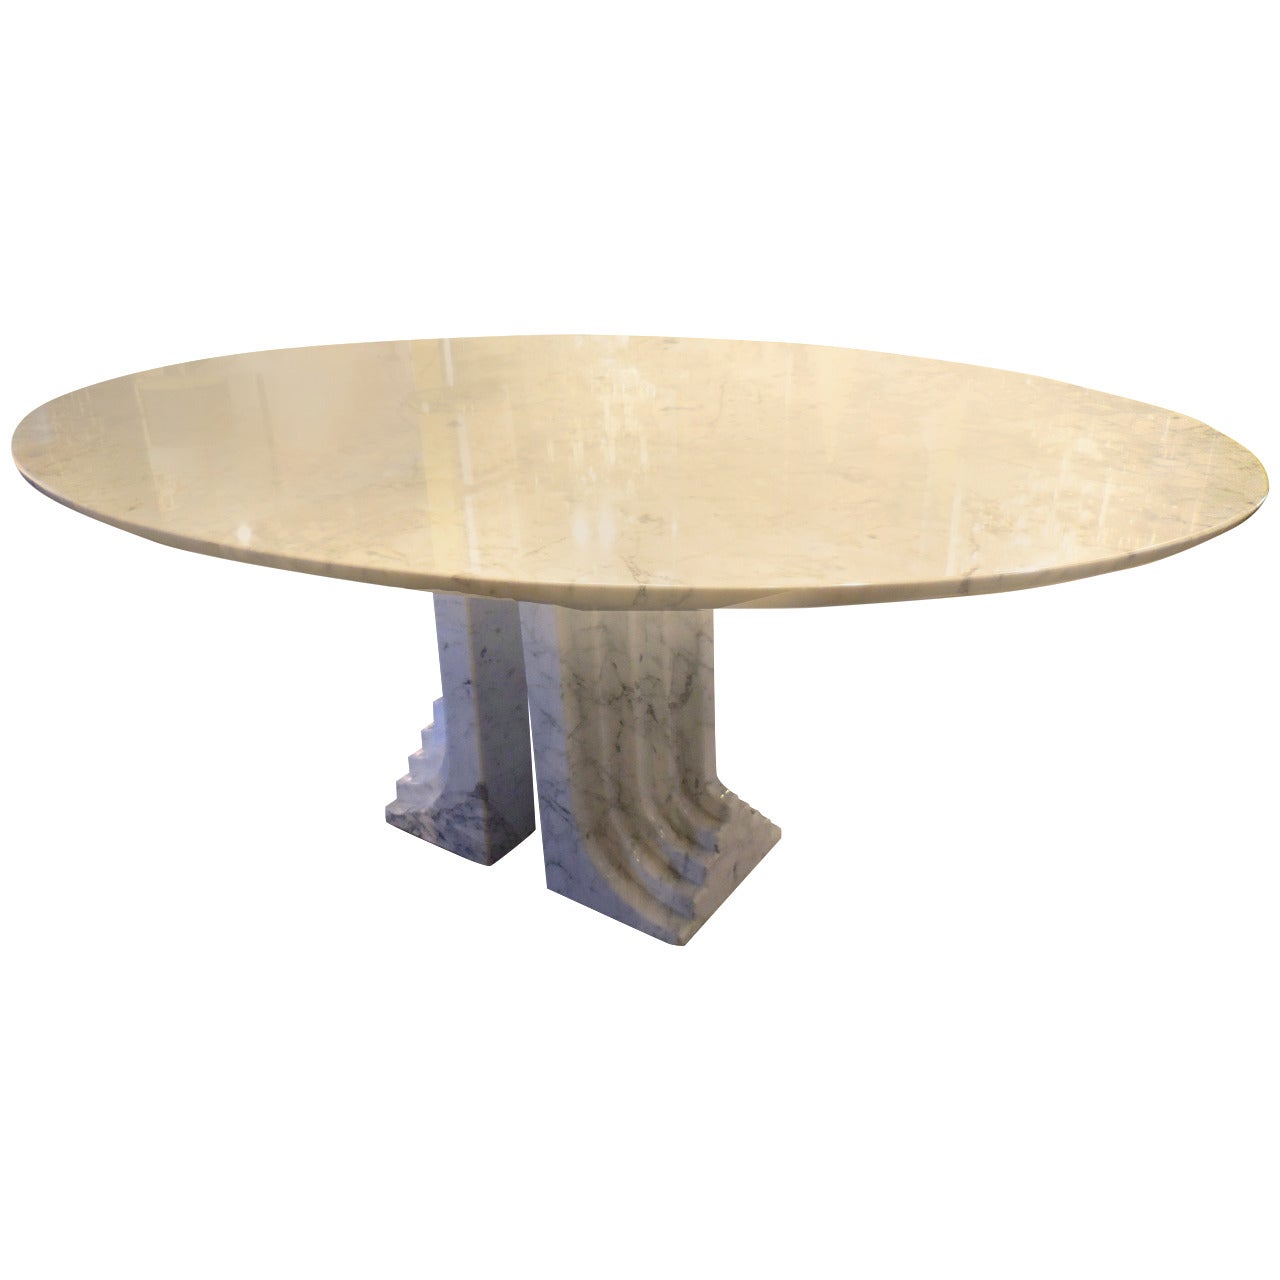 "Samo" Dining Table in Naxos Marble by Carlo Scarpa, circa 1970s